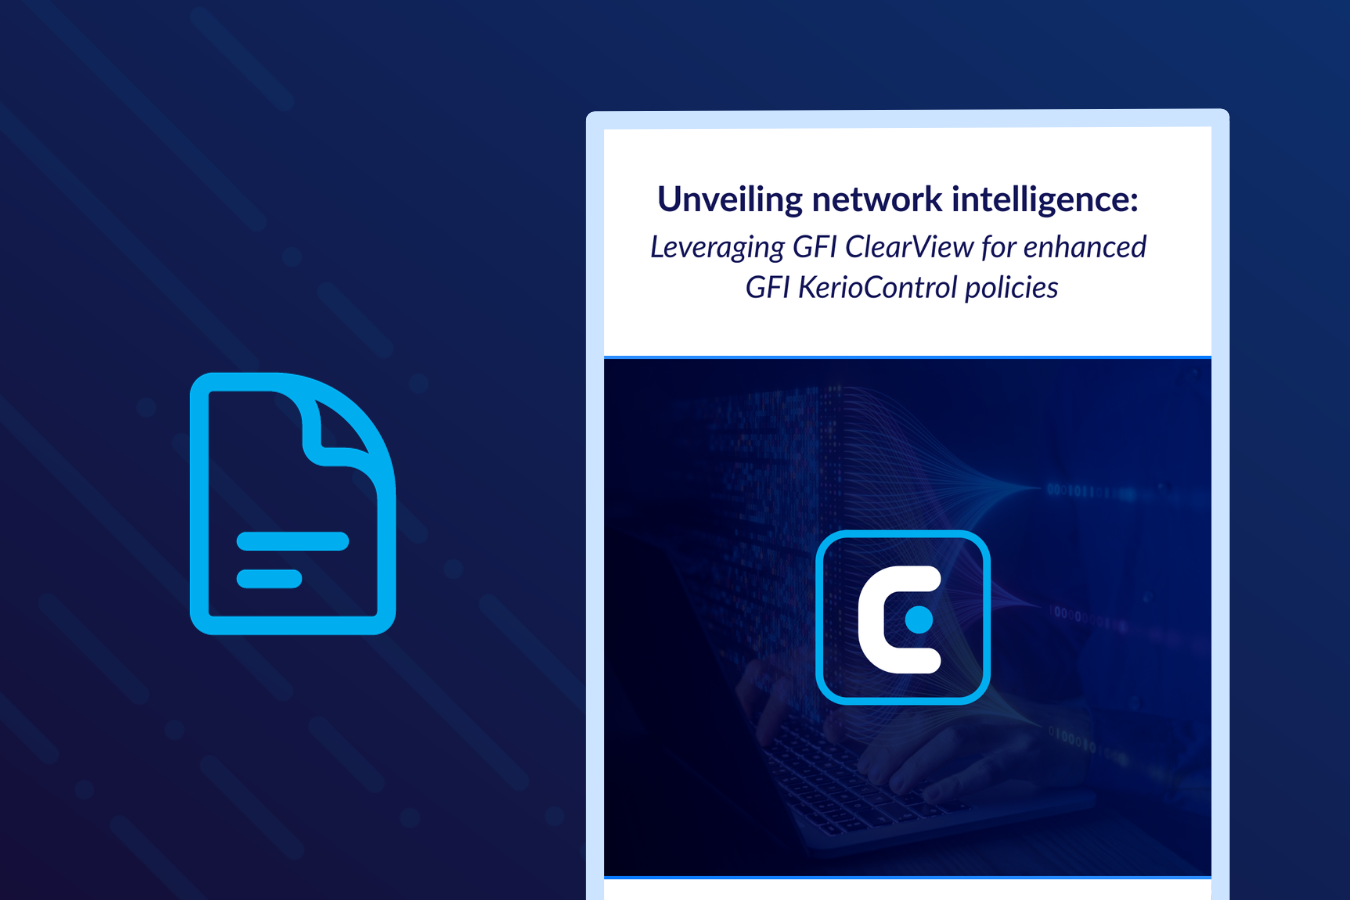 Unveiling network intelligence: Leveraging GFI ClearView for enhanced GFI KerioControl policies